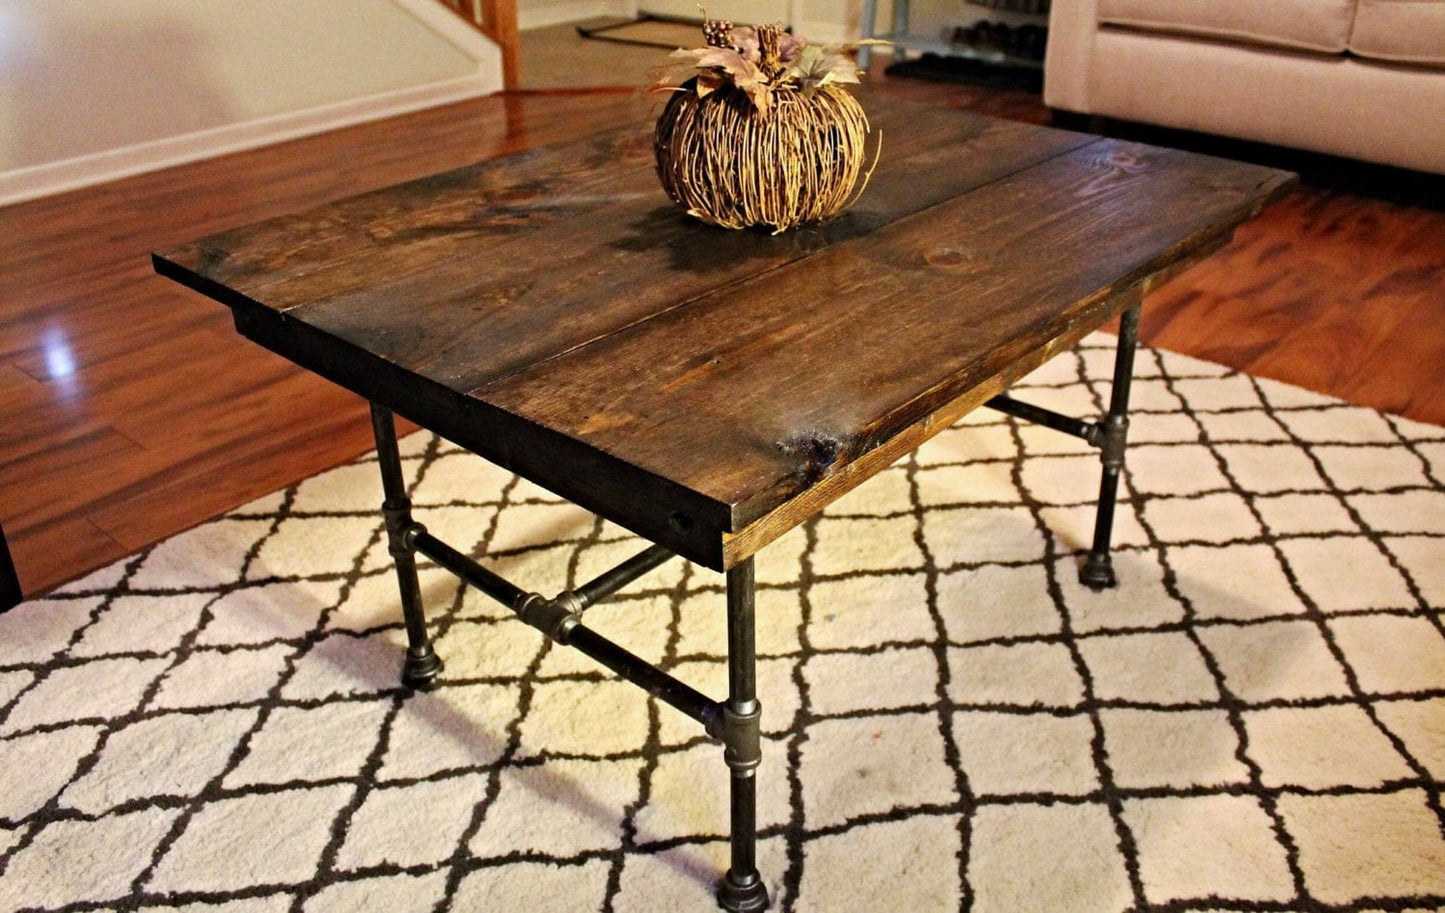 Steel and Pine Wood Coffee Table